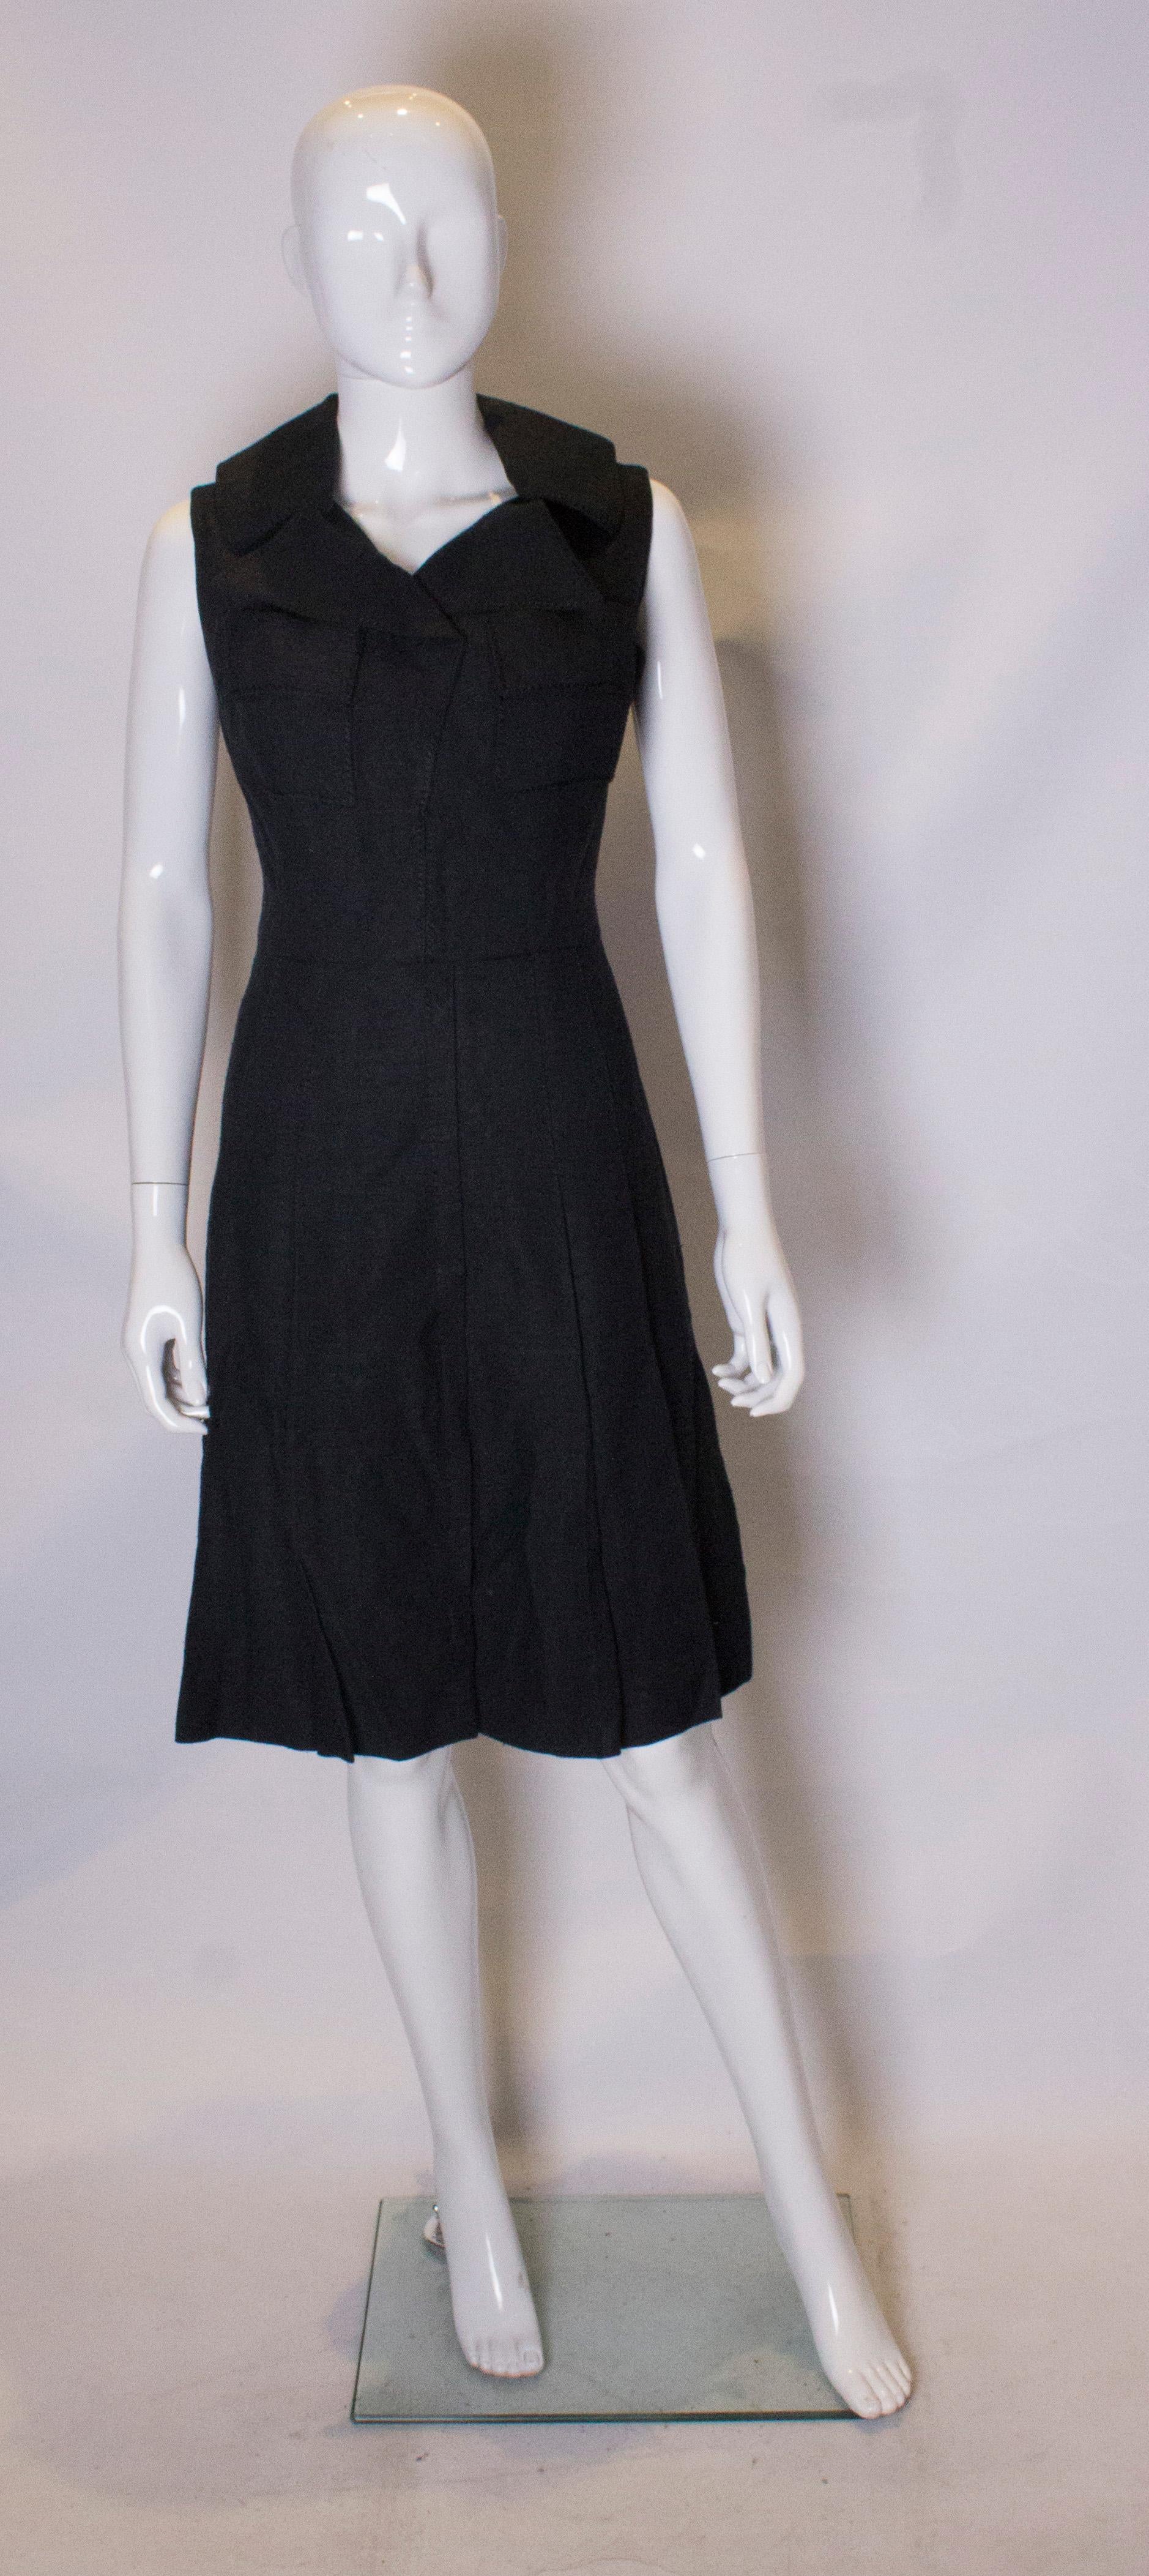 A chic black dress dating from the 1960s, from the Fashion Club London. The dress has a cut away collar, two breast pockets and a pleated skirt with pleats sewn in to hop leval. It has a central back zip and is fully lined.